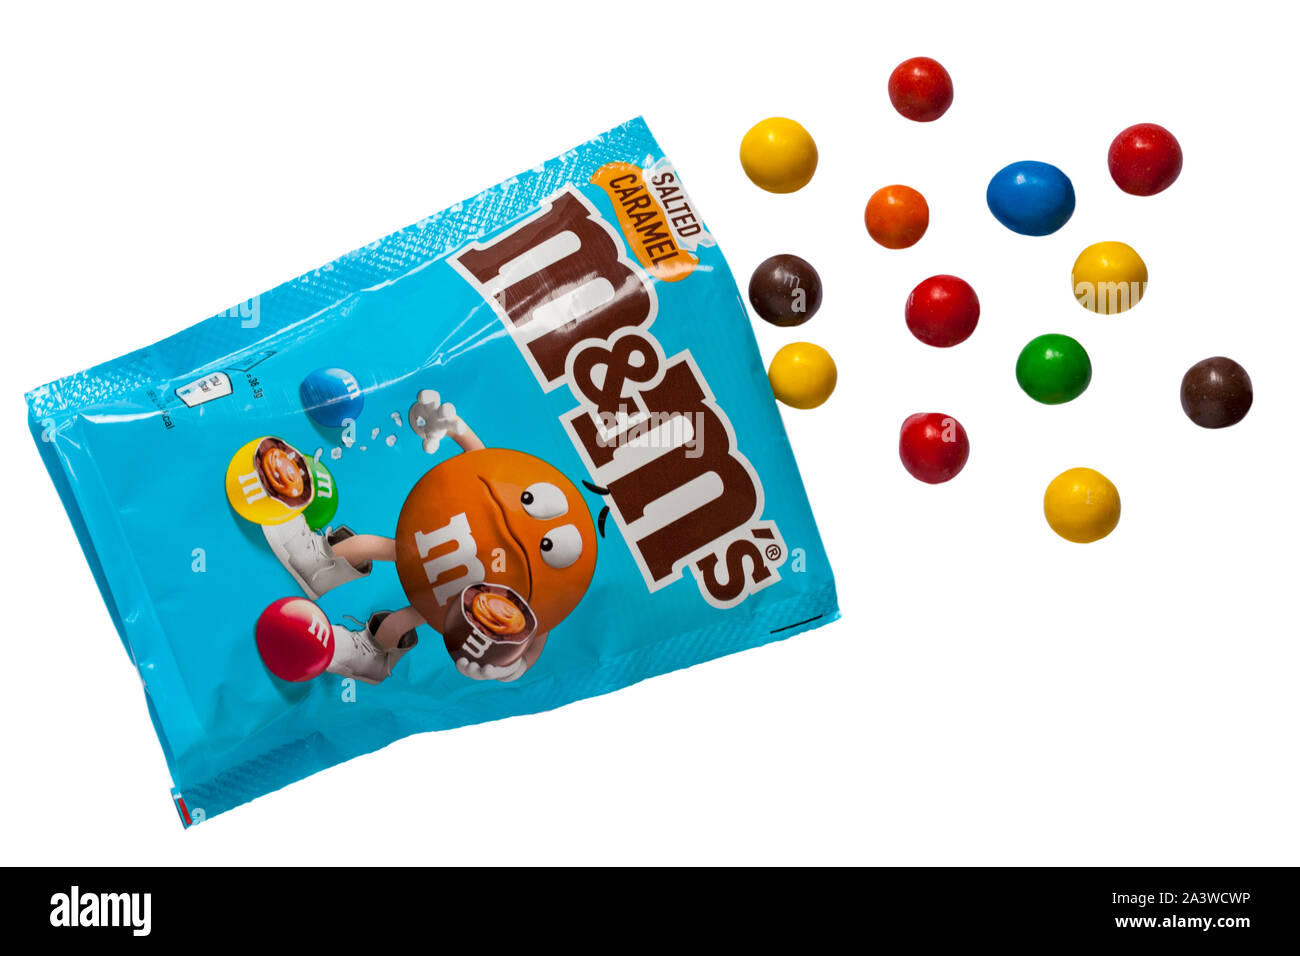 Packet of salted caramel M&Ms sweets candies opened with contents